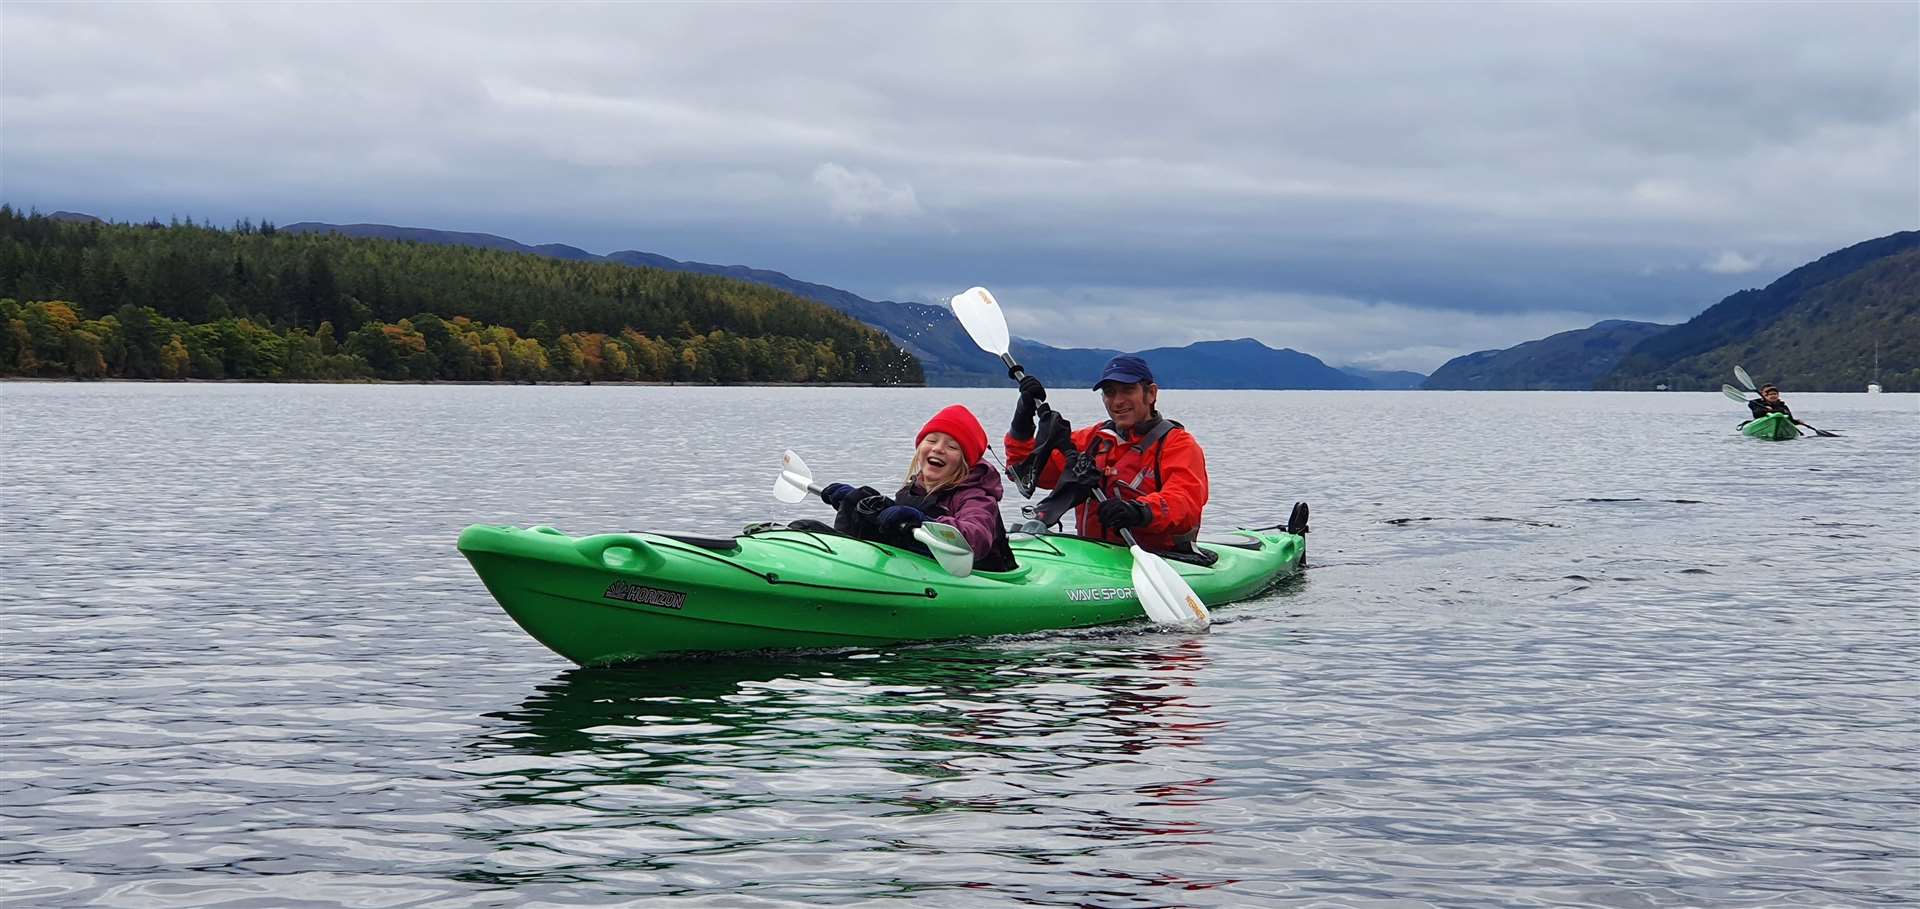 John kayaking on Loch Ness with his daughter Clara on a trip with local activity provider Explore Highland.